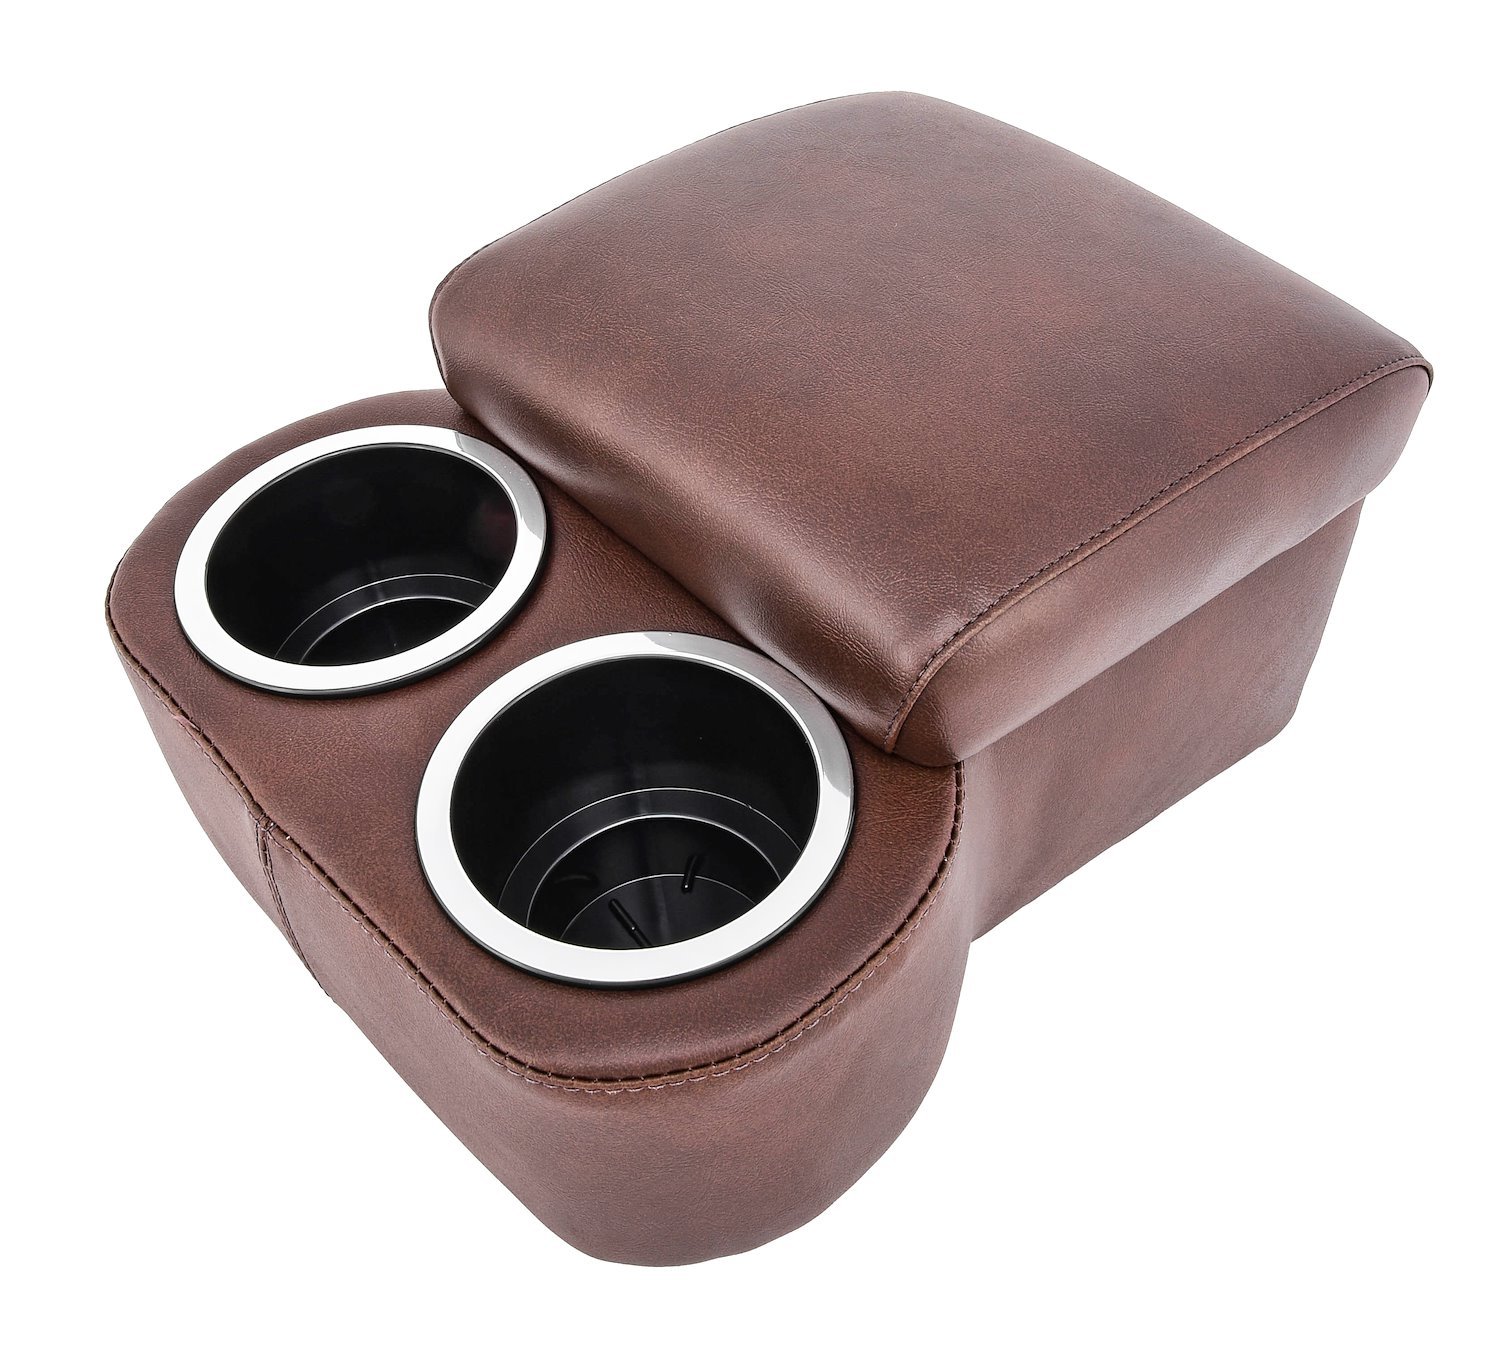 Shorty Bench Seat Cruiser Console For Limited-Depth Bench Seat Vehicles [Dark Brown, (2) Large Cup Holders]